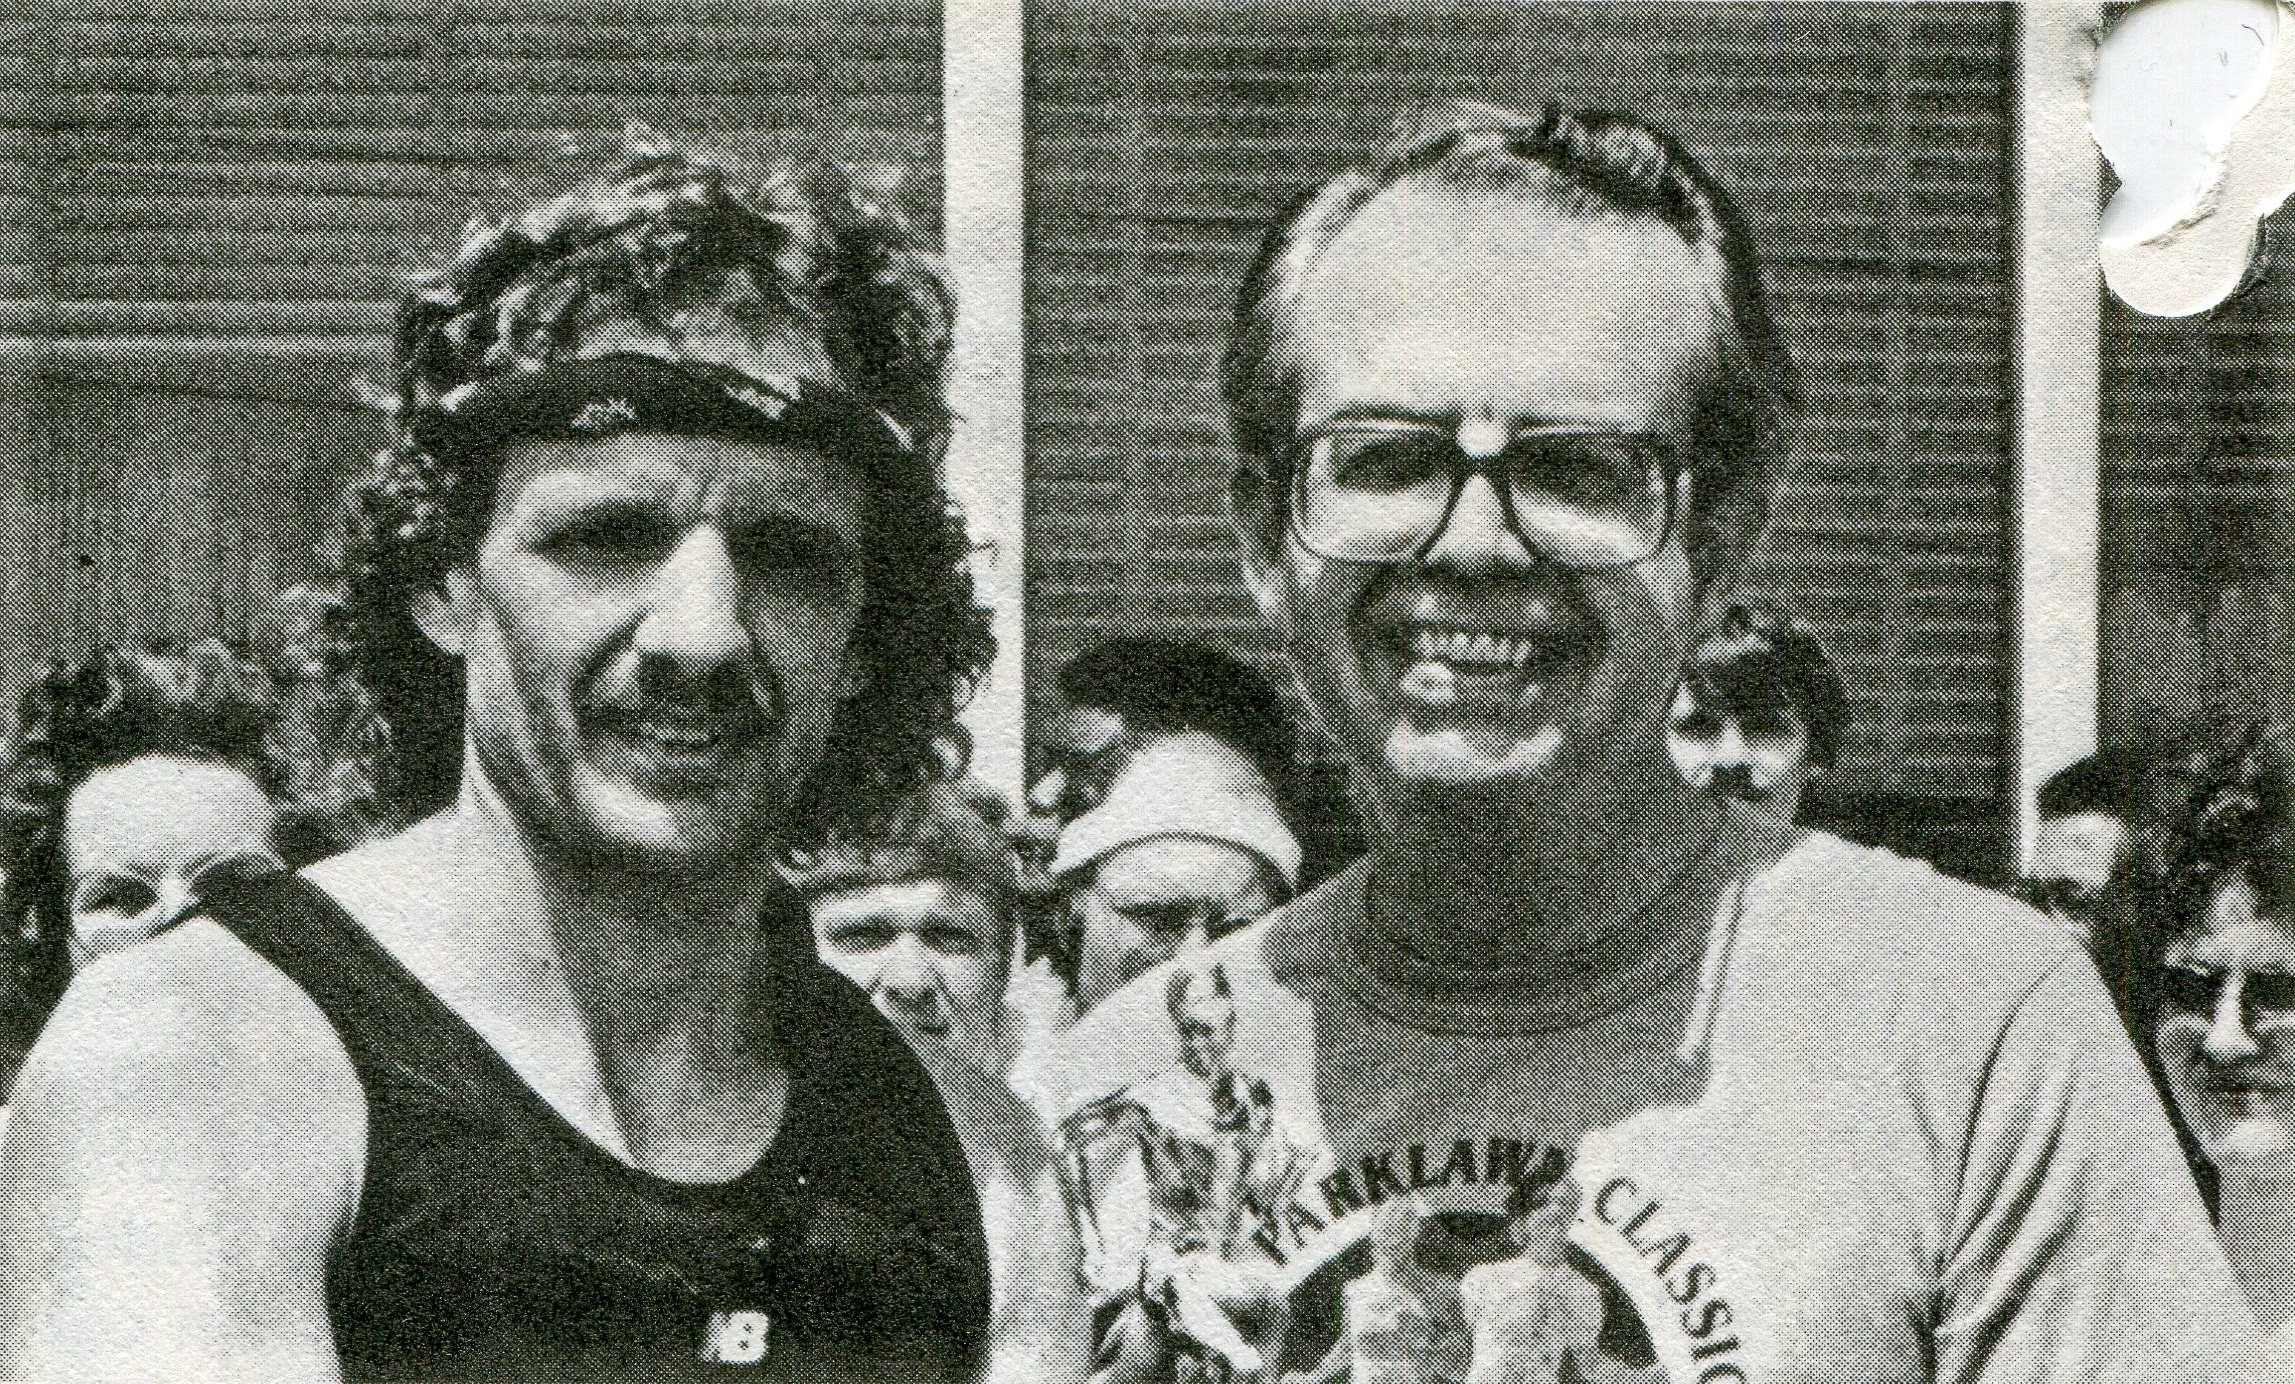 a photo of Russell J. Abbott with Edward Brandt in running clothes after a race. Taken from the FDA Today 1983 paper